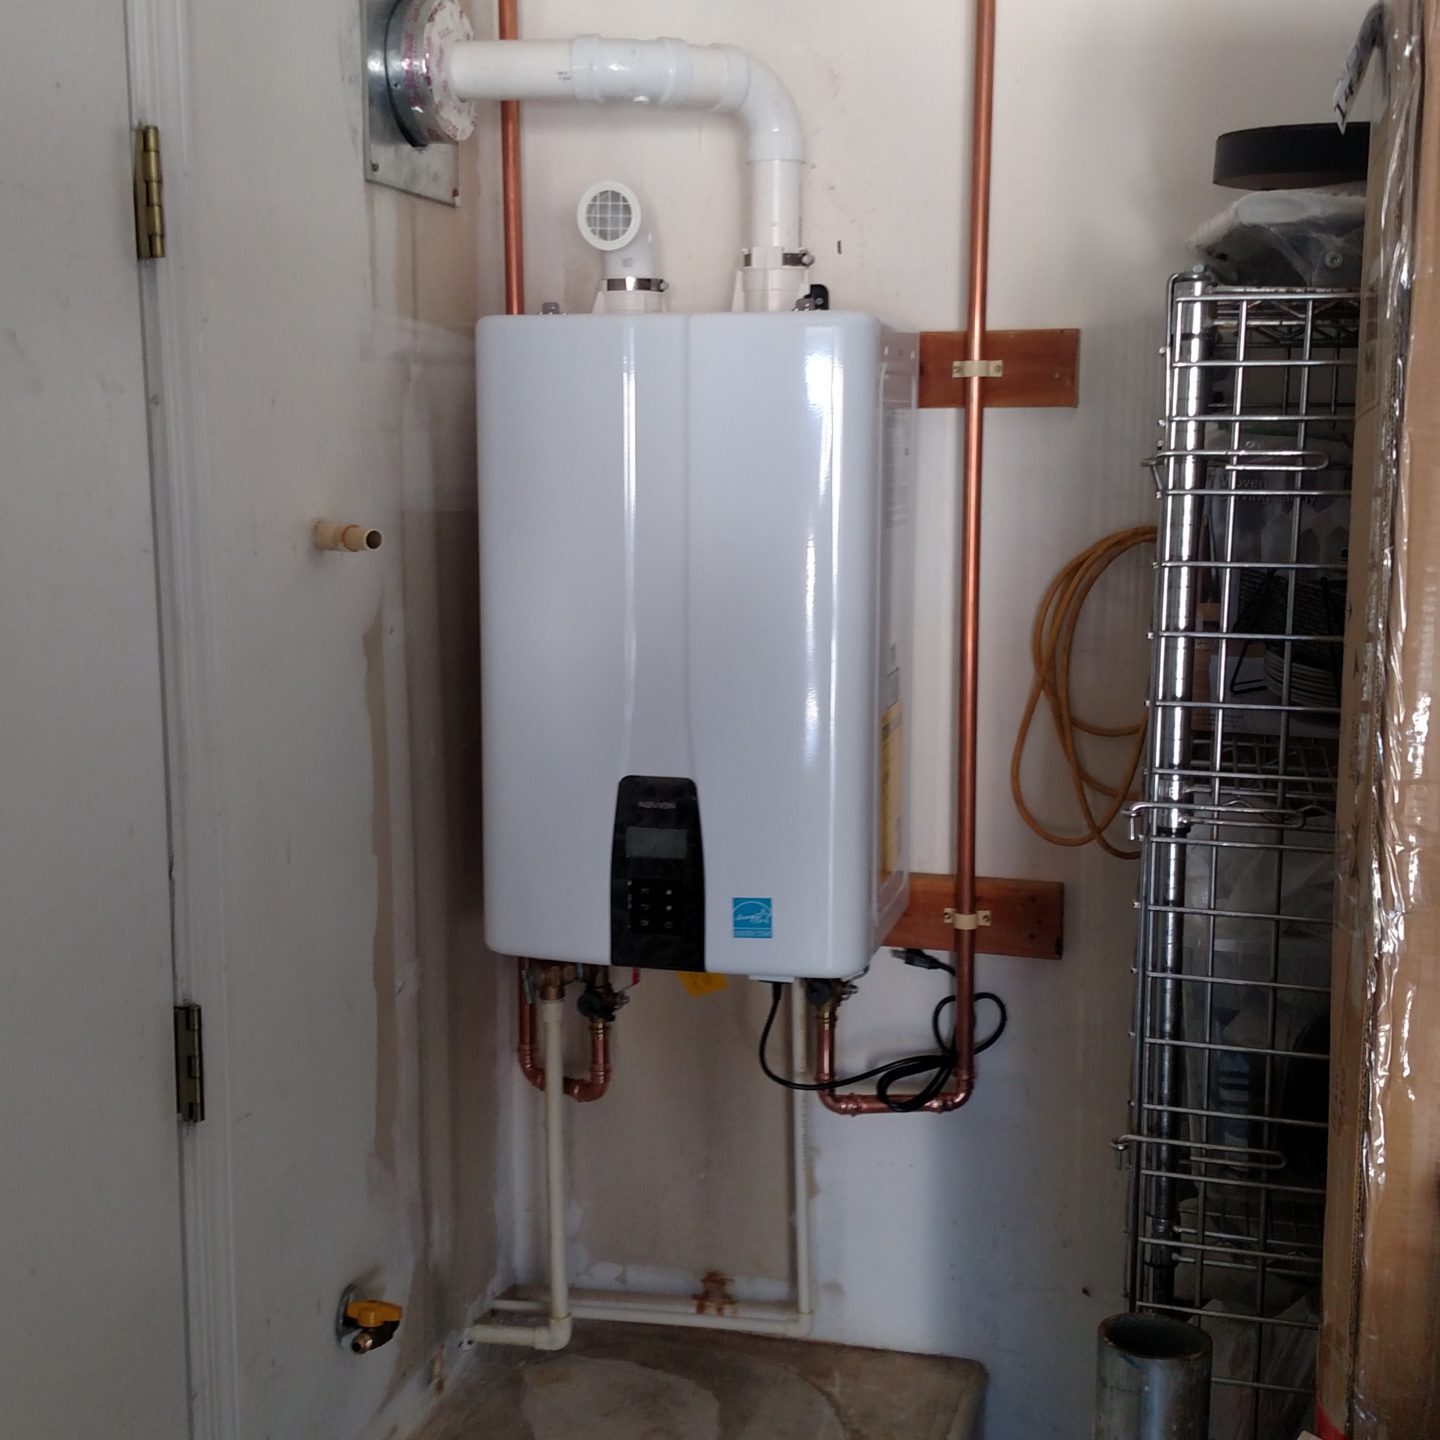 Tankless Water Heater Installed